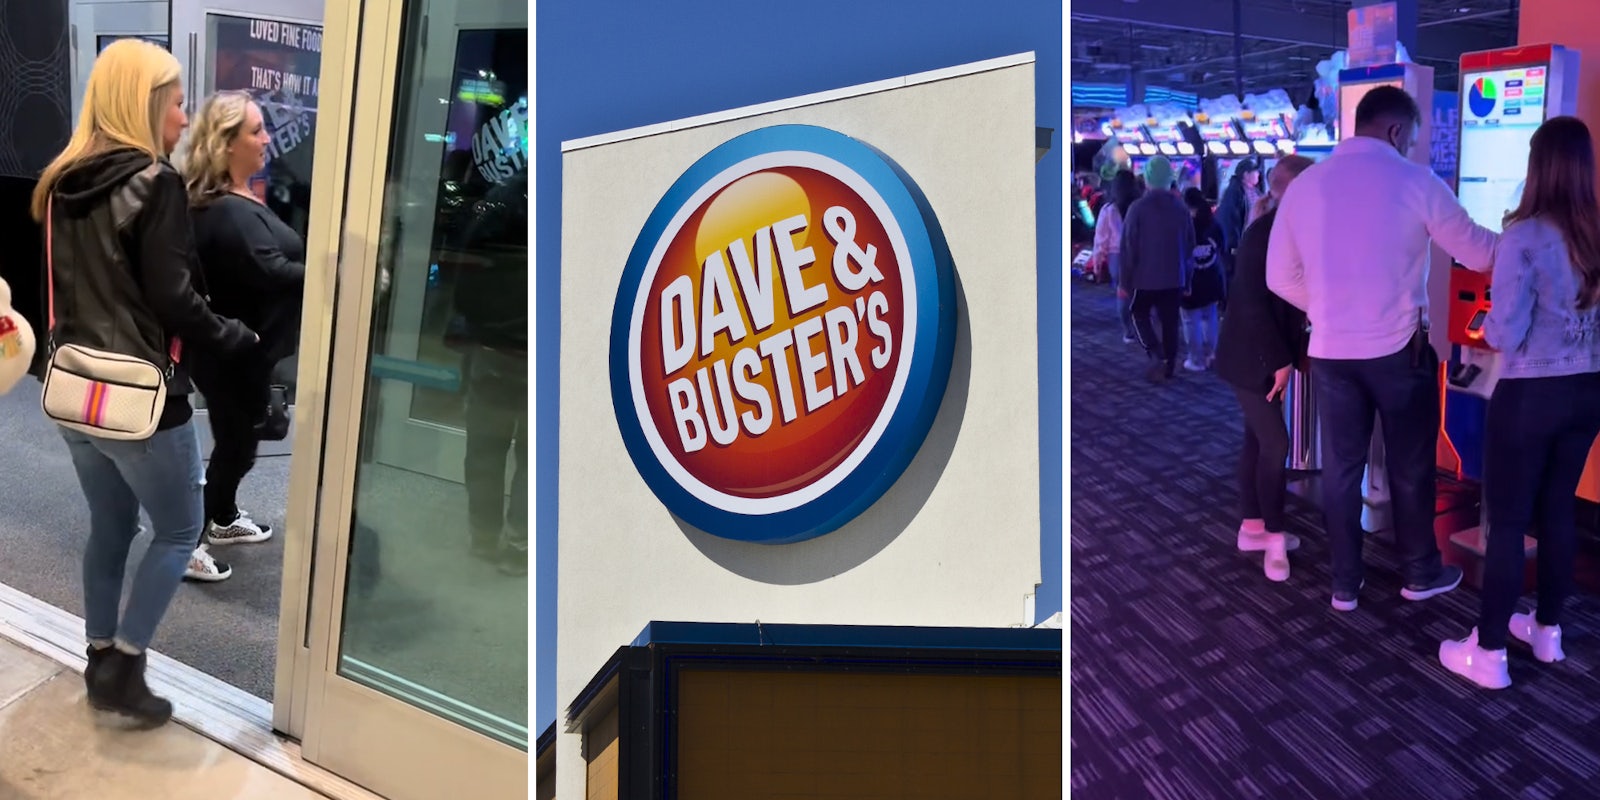 Woman says Dave & Busters customers accused her of stealing money off their game card, then verbally abused her. She got kicked out